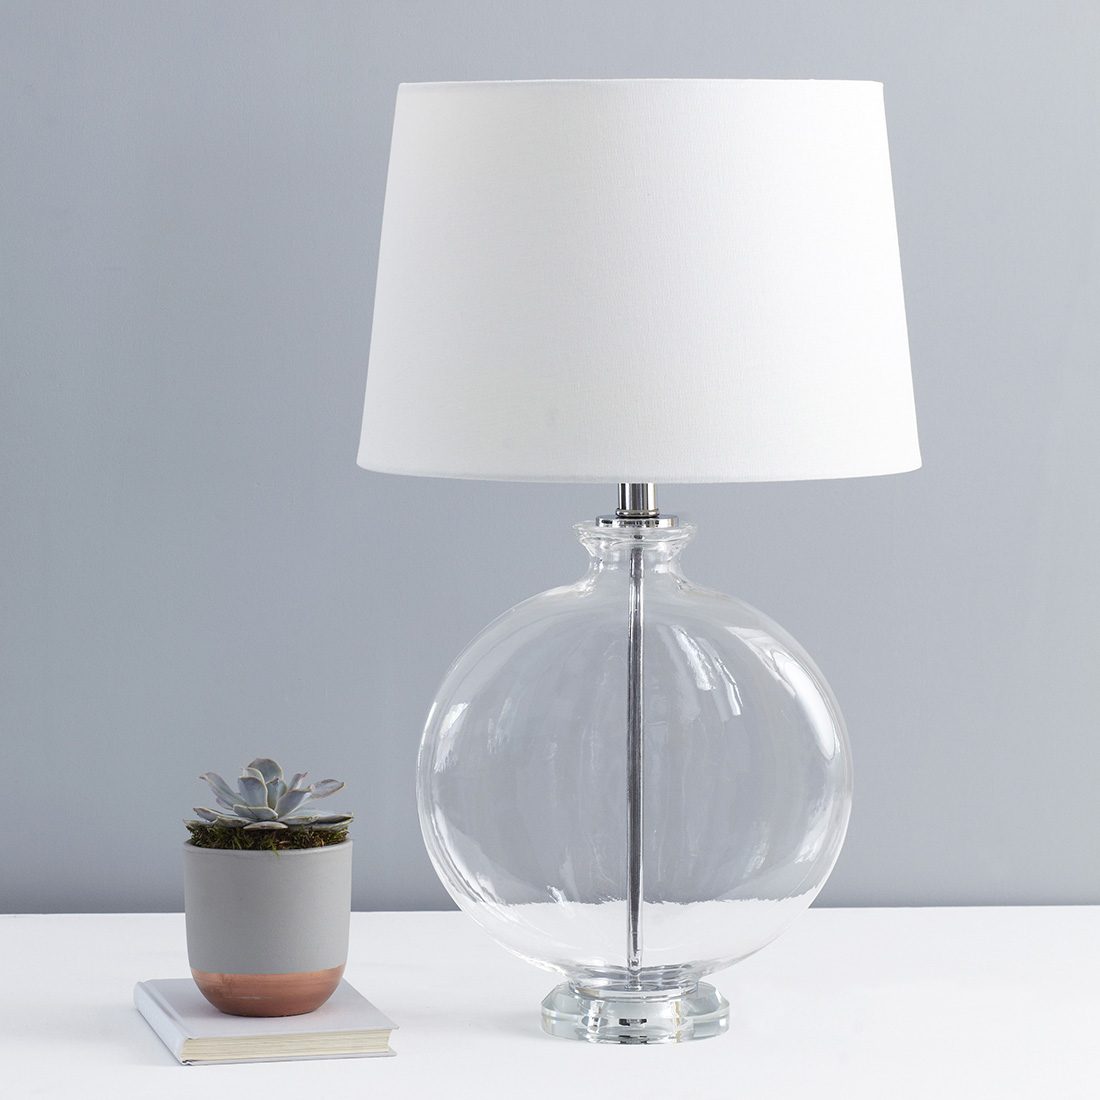 Slim Round Glass Table Lamp With White, Glass Desk Lamp Shade